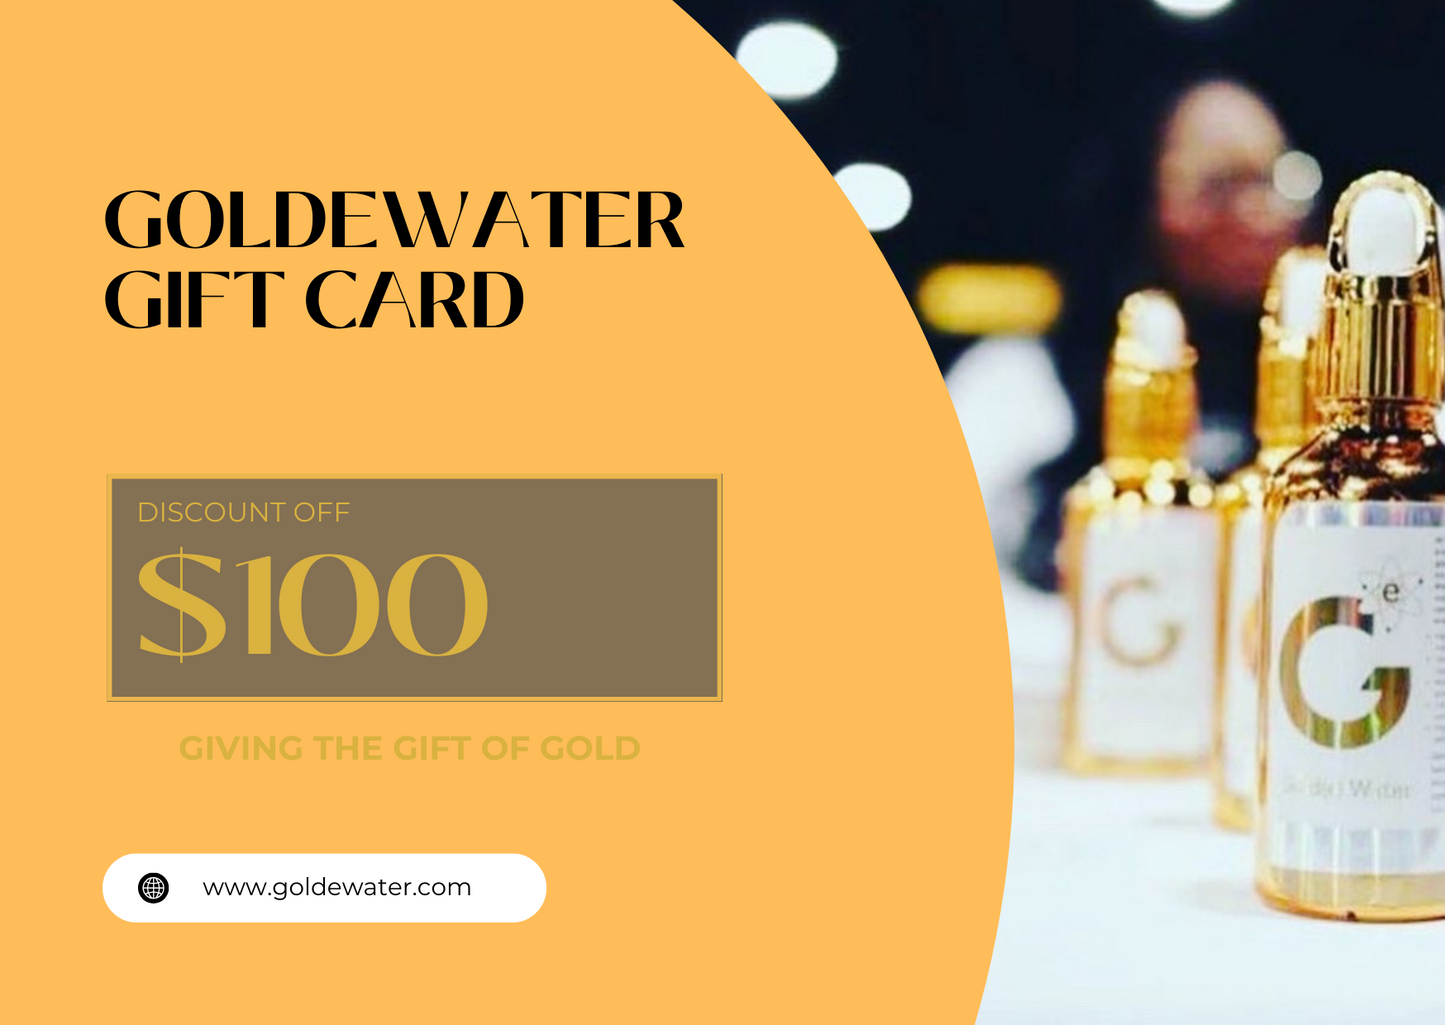 Goldewater Gift Card